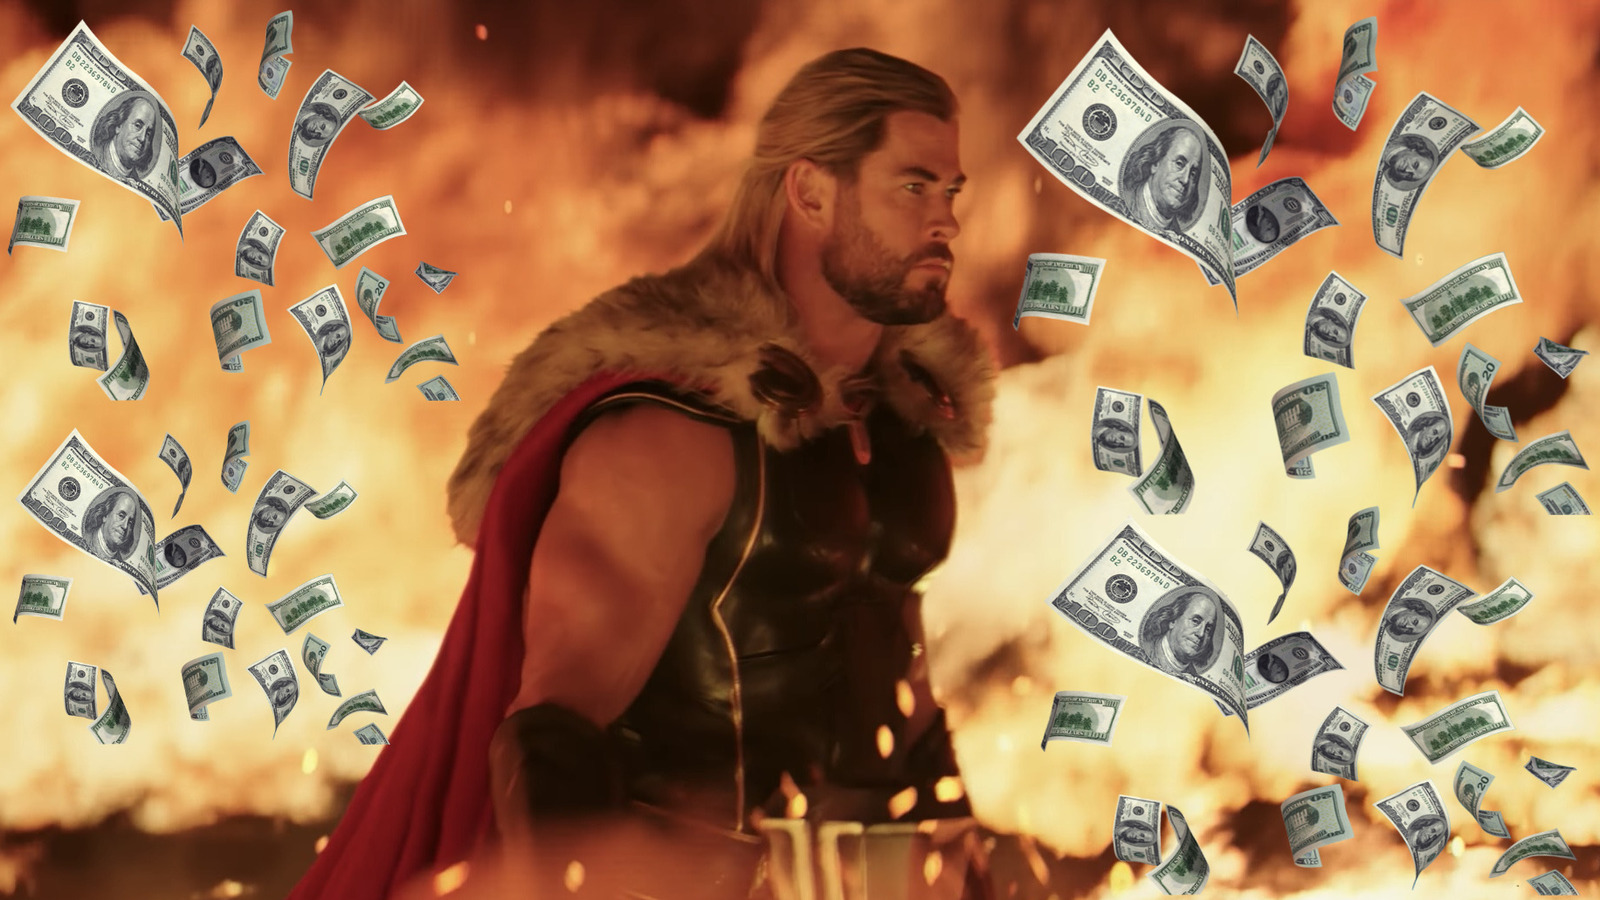 Thor Easily Wins Weekend Box Office With $143 Million